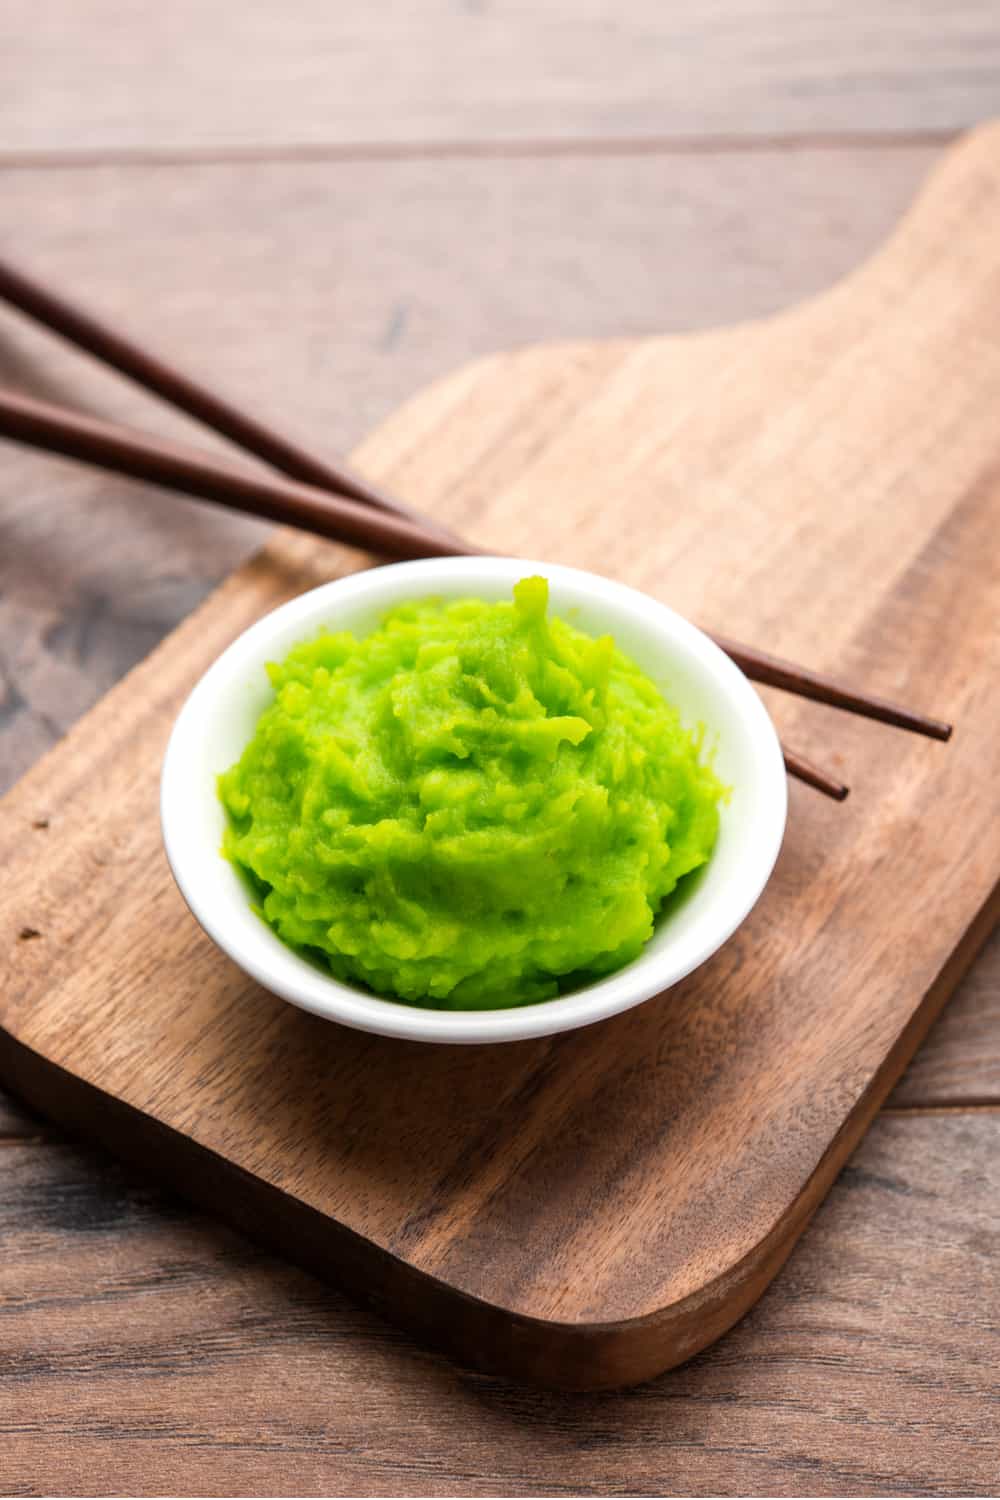 5 Tips To Tell If Wasabi Has Gone Bad